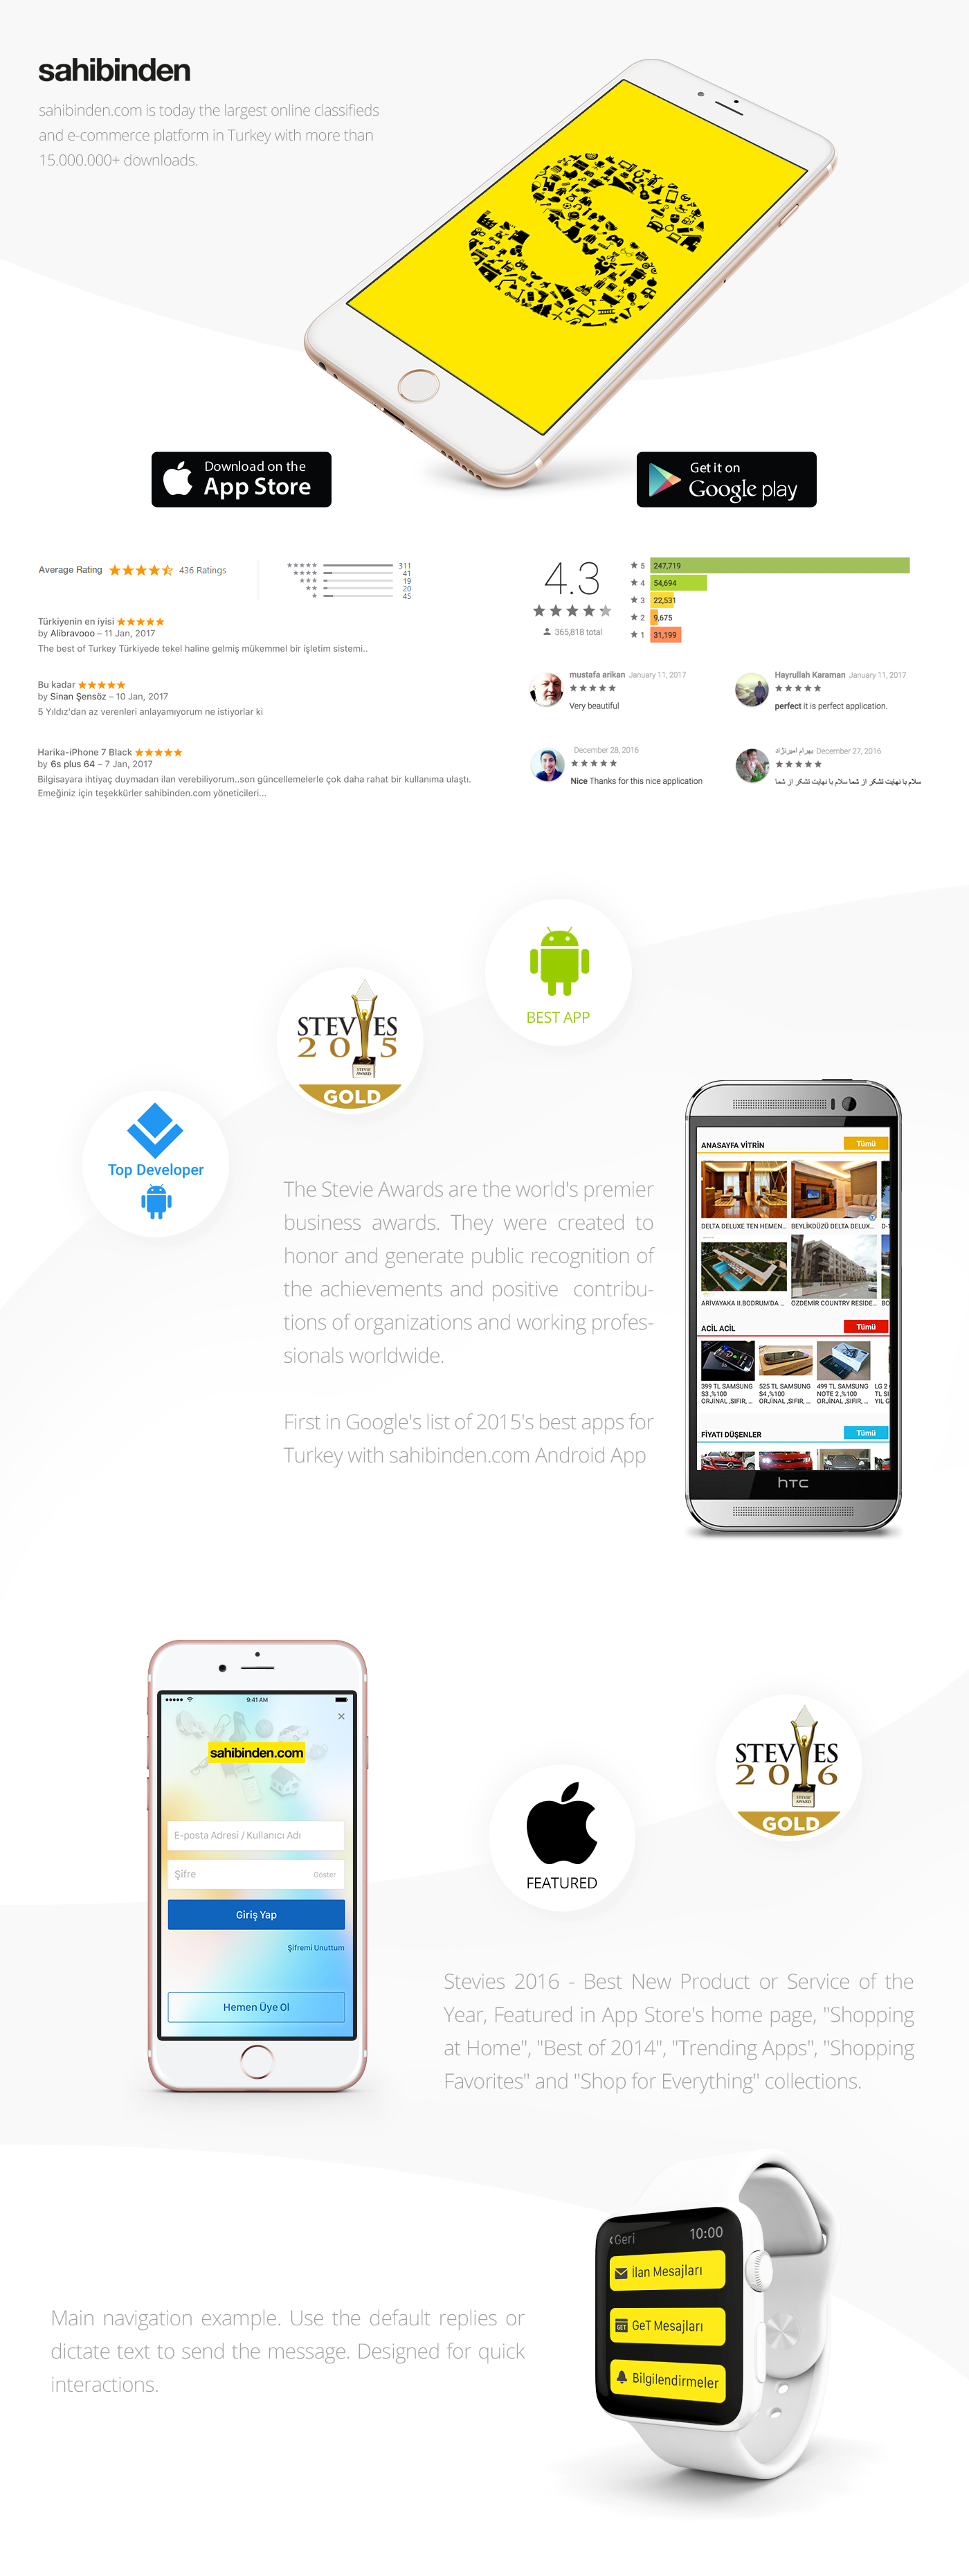 ios iwatch android e-commerce user experience featured classified ads best app mobile real estate